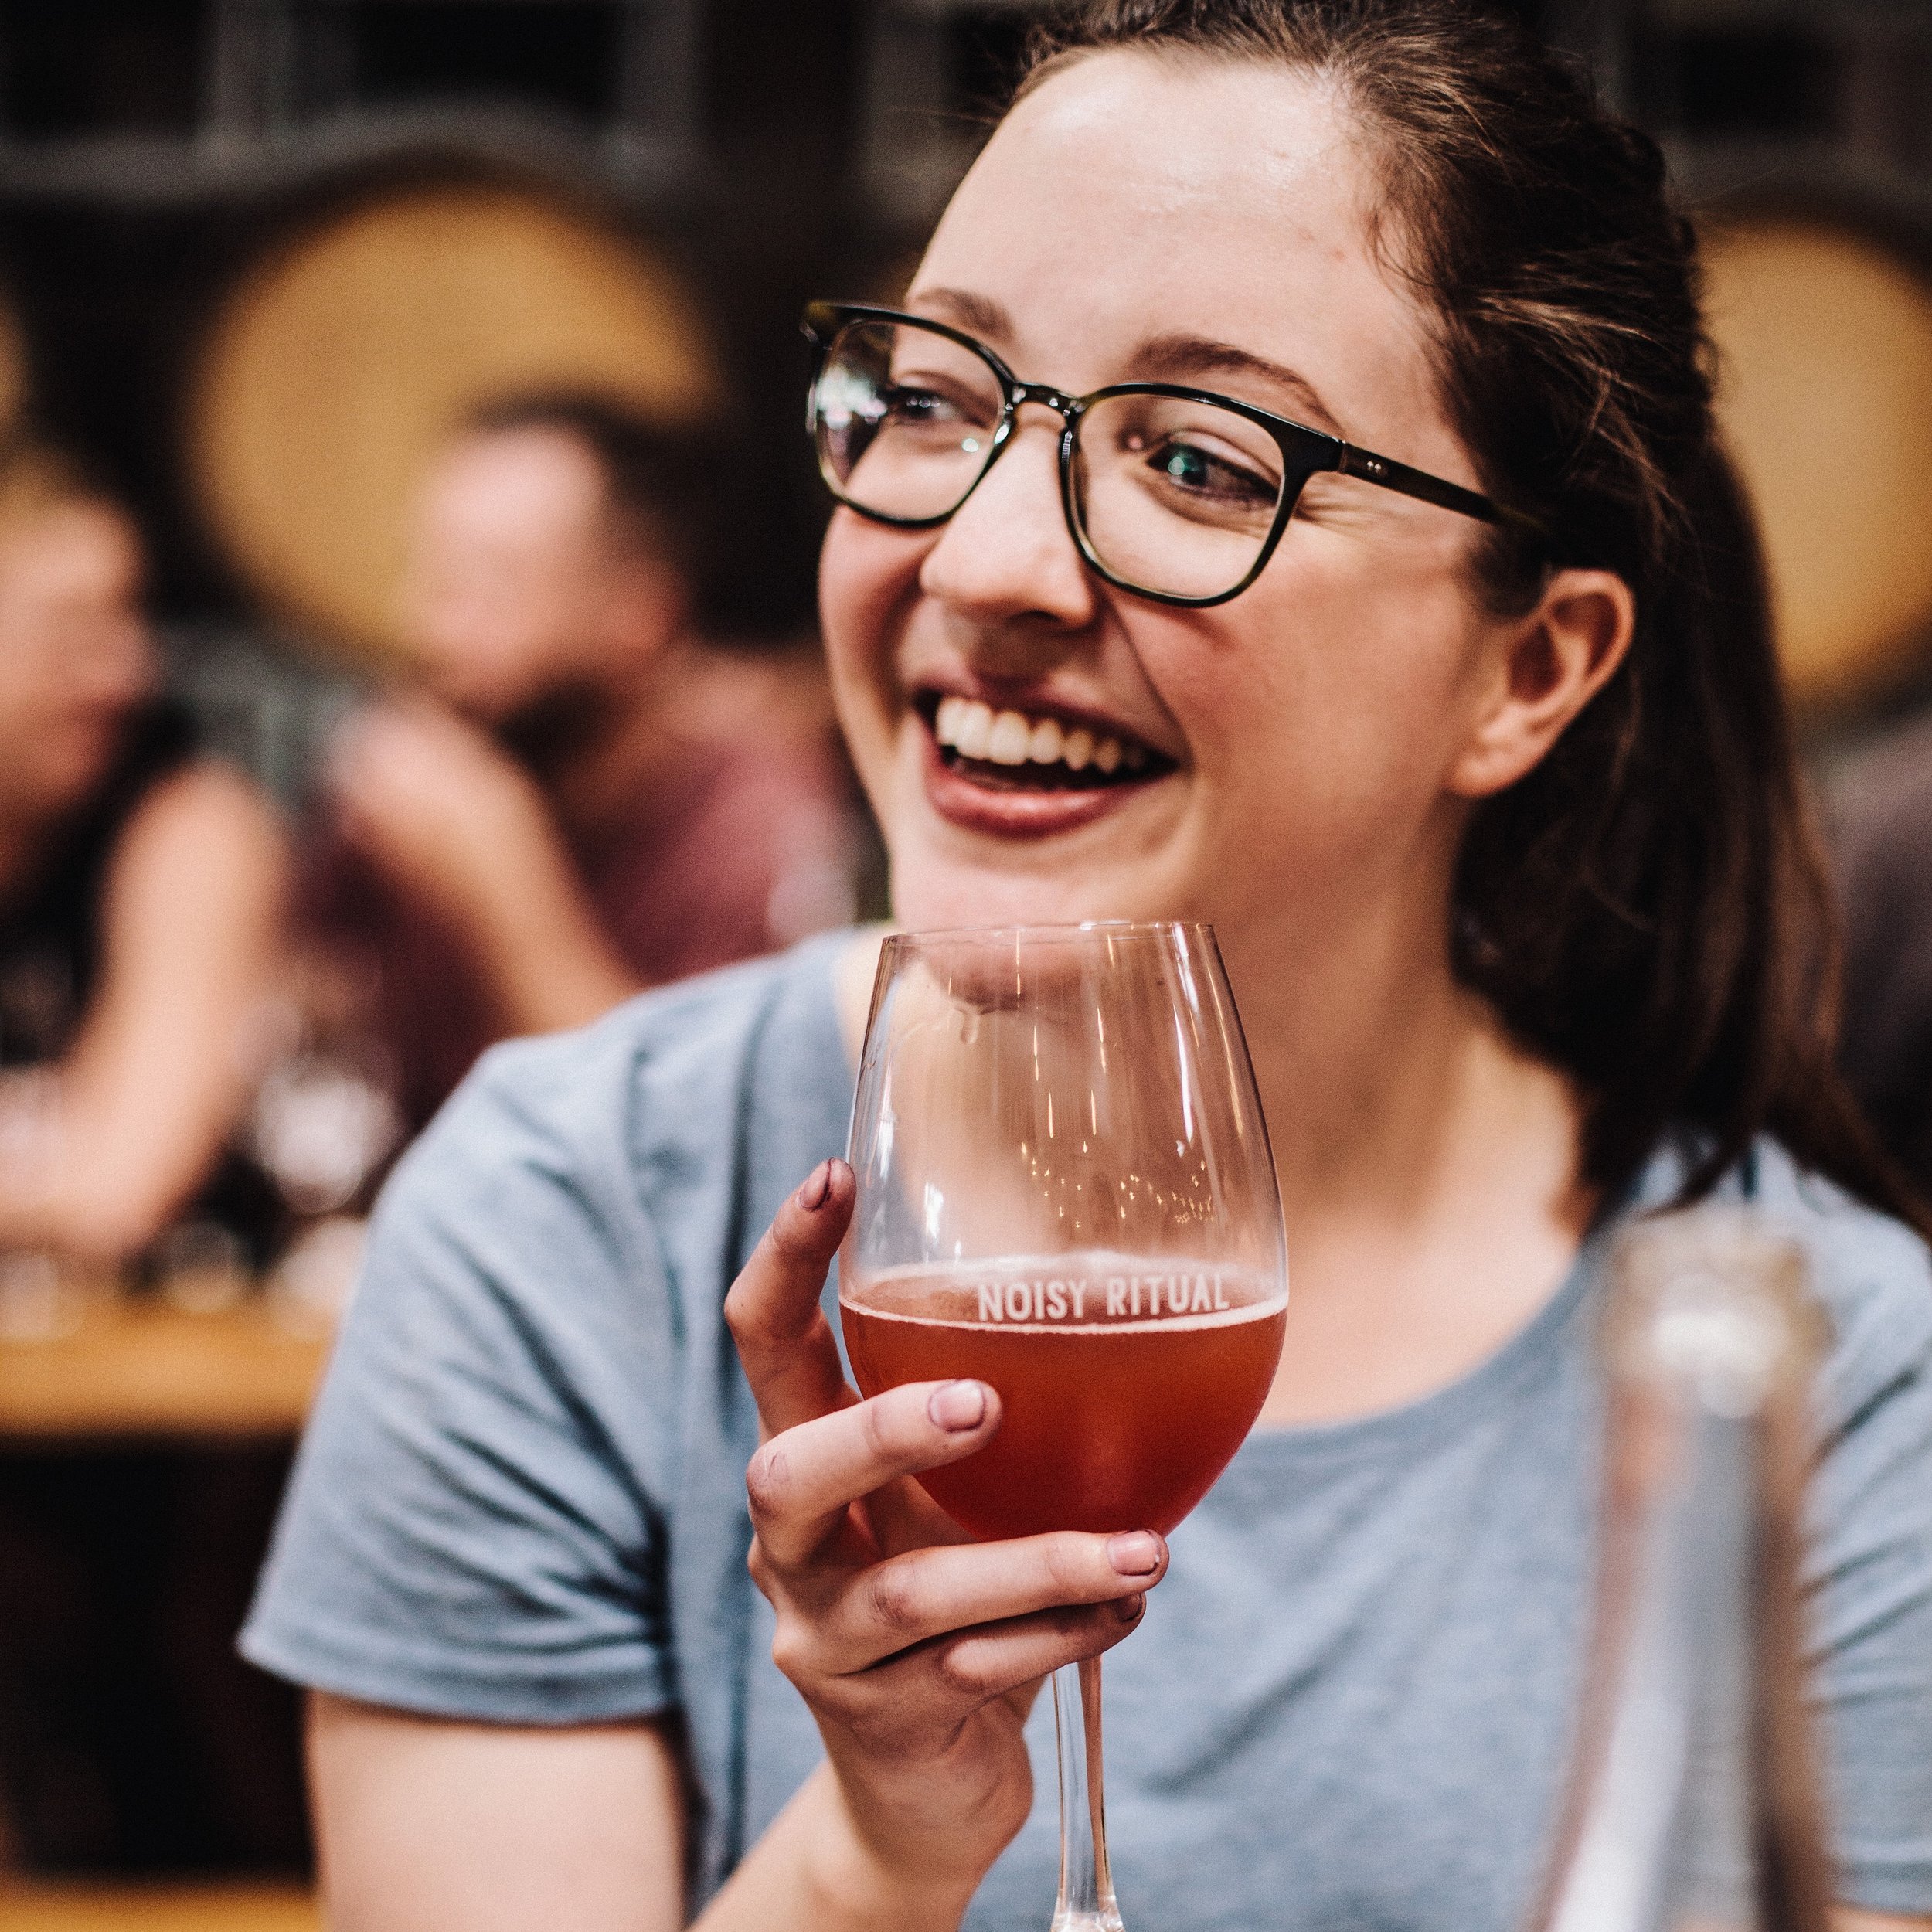 THIS WEEK
If you like your wine tastings FREE, and your Mothers Days FUN, you know where to head this week!

Things to know:

FREE TASTING WITH ALEX AND CAM
FRI 10 MAY &bull; 6pm
It&rsquo;s time to run you through our best Autumn/Winter warmers - del